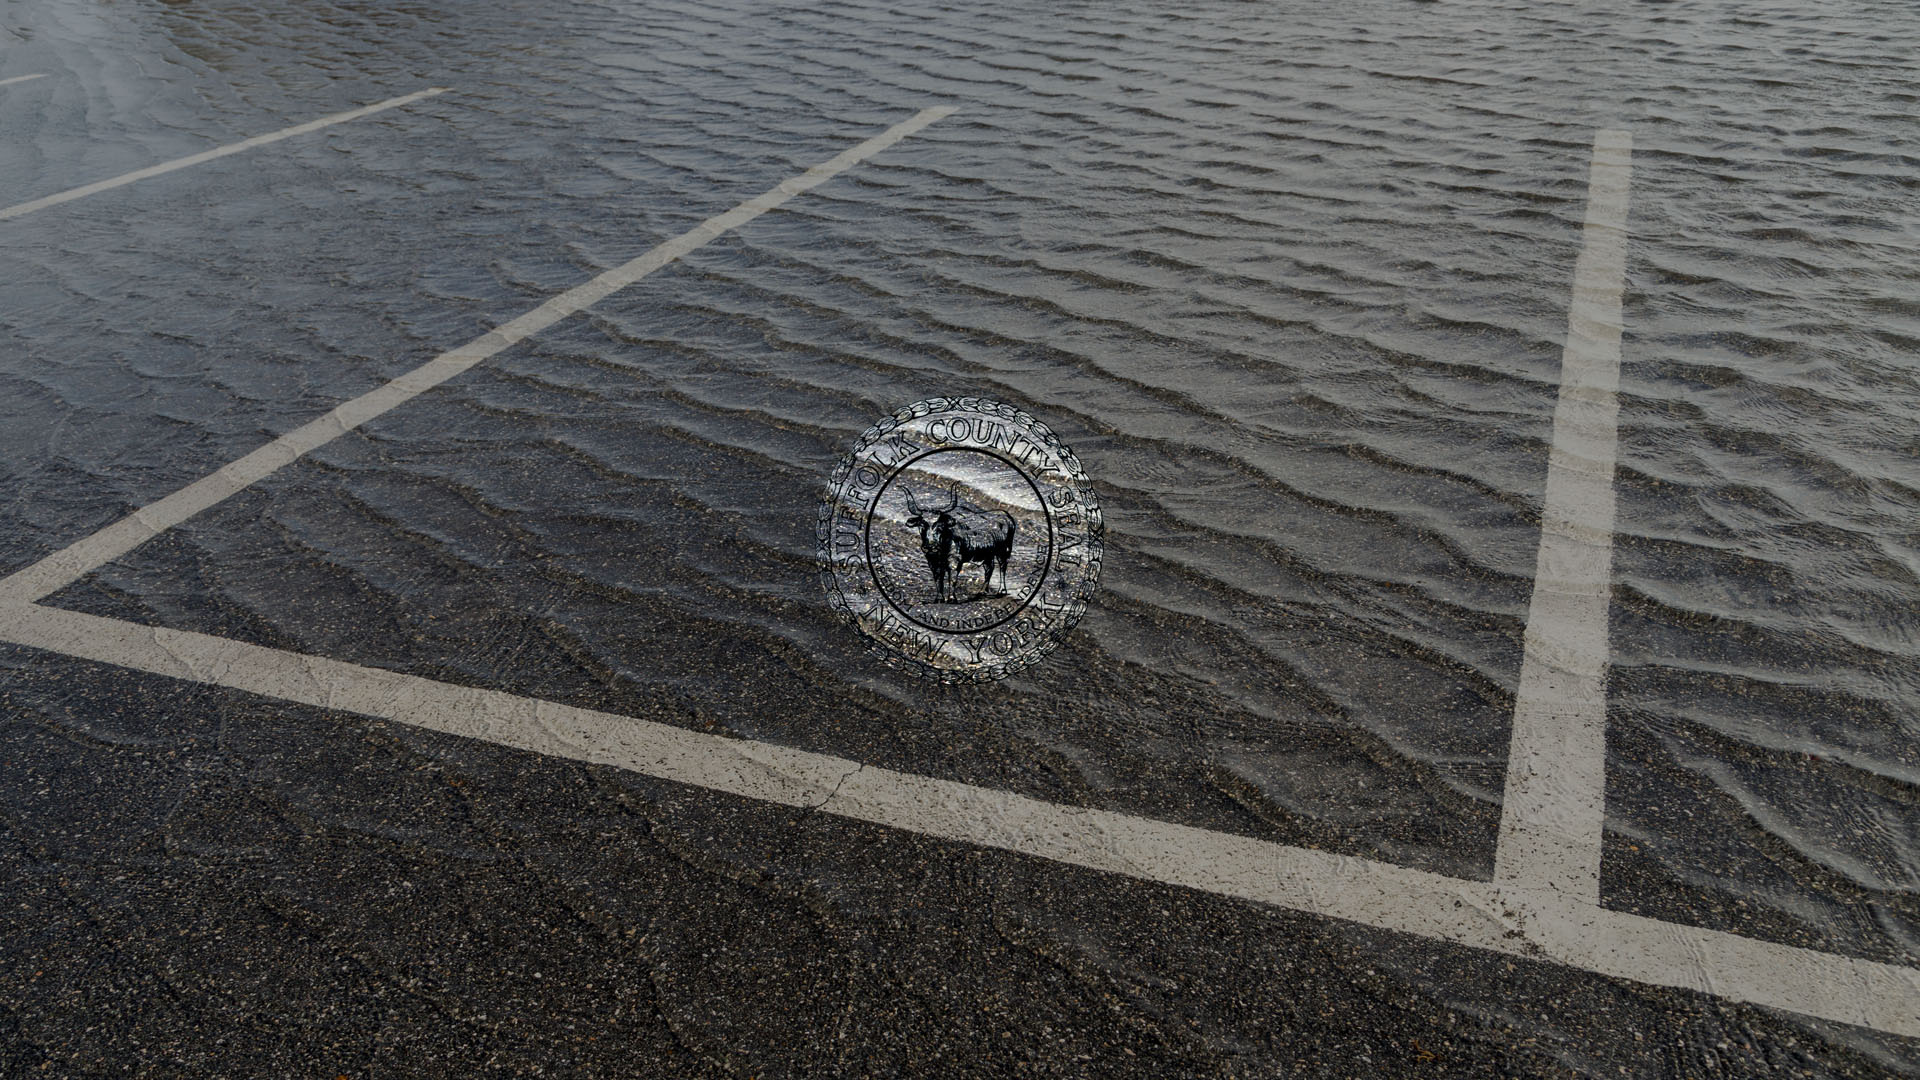 All Storm Drains Inc. | Parking Lot Drainage Service | Suffolk County, Long Island, NY | Phone: 516.825.1010 Fax: 631.475.2898 | George@AllStormDrains.com